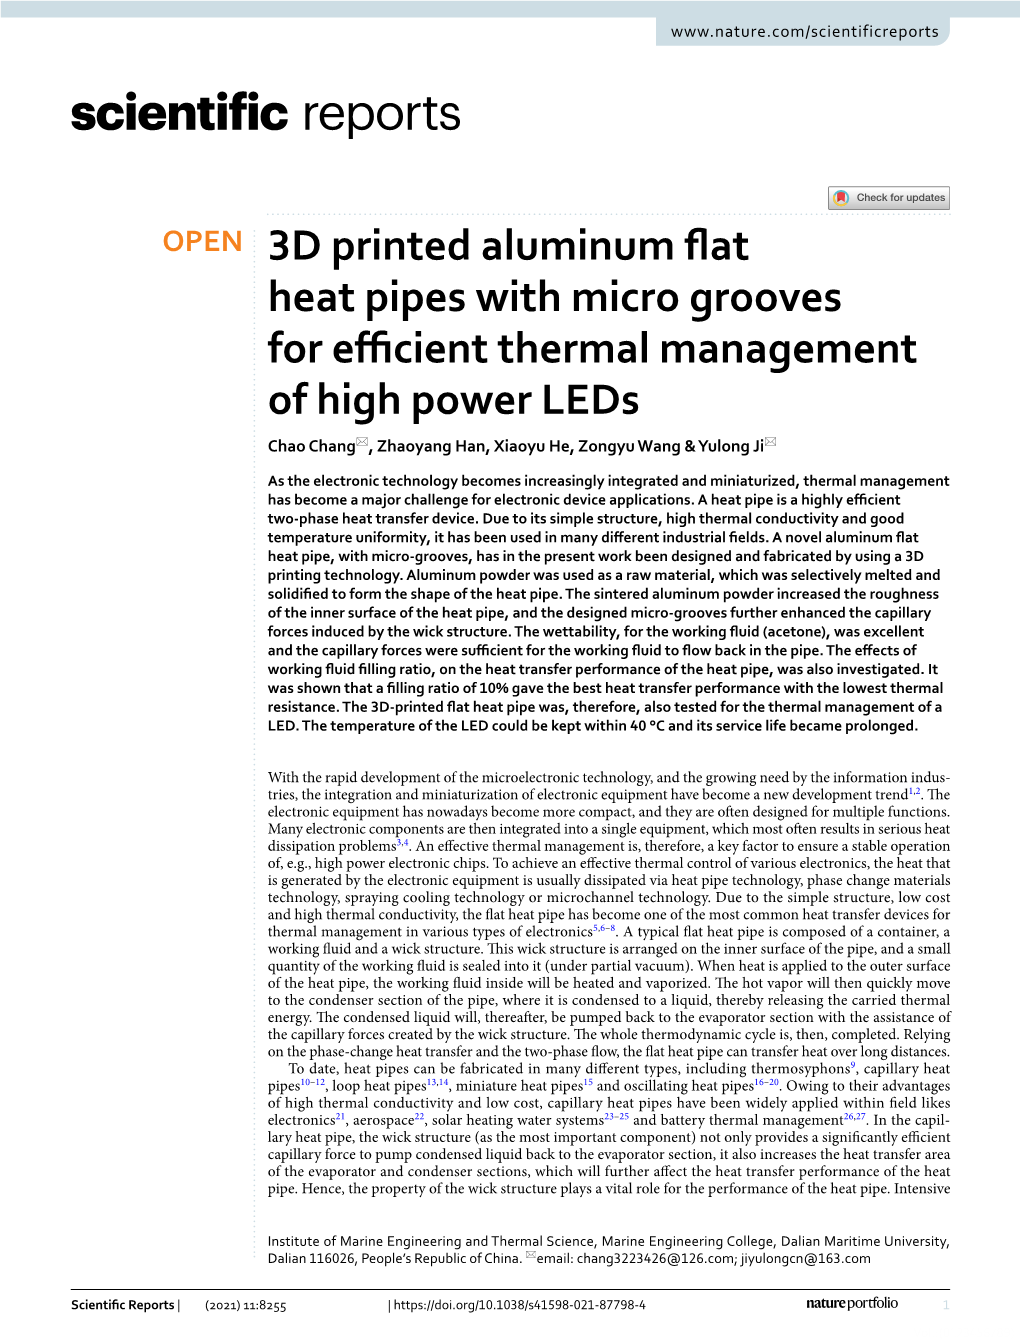 3D Printed Aluminum Flat Heat Pipes with Micro Grooves for Efficient Thermal Management of High Power Leds